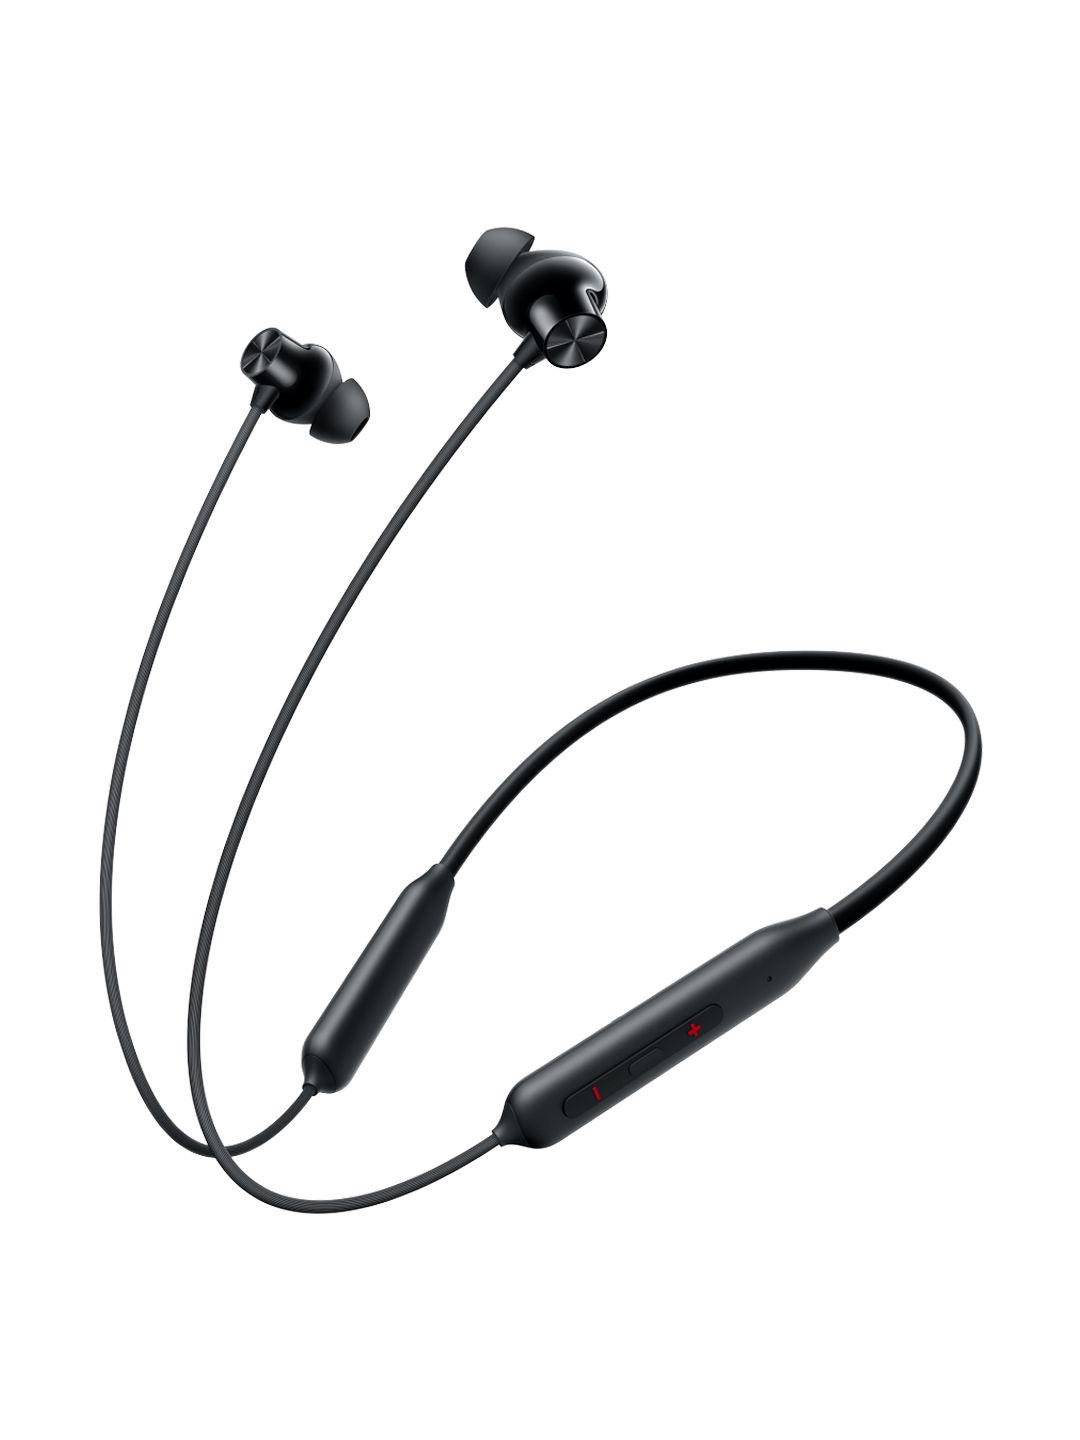 oneplus-bullets-z2-wireless-earphones-with-12.4mm-drivers-&-upto-30hours-playback